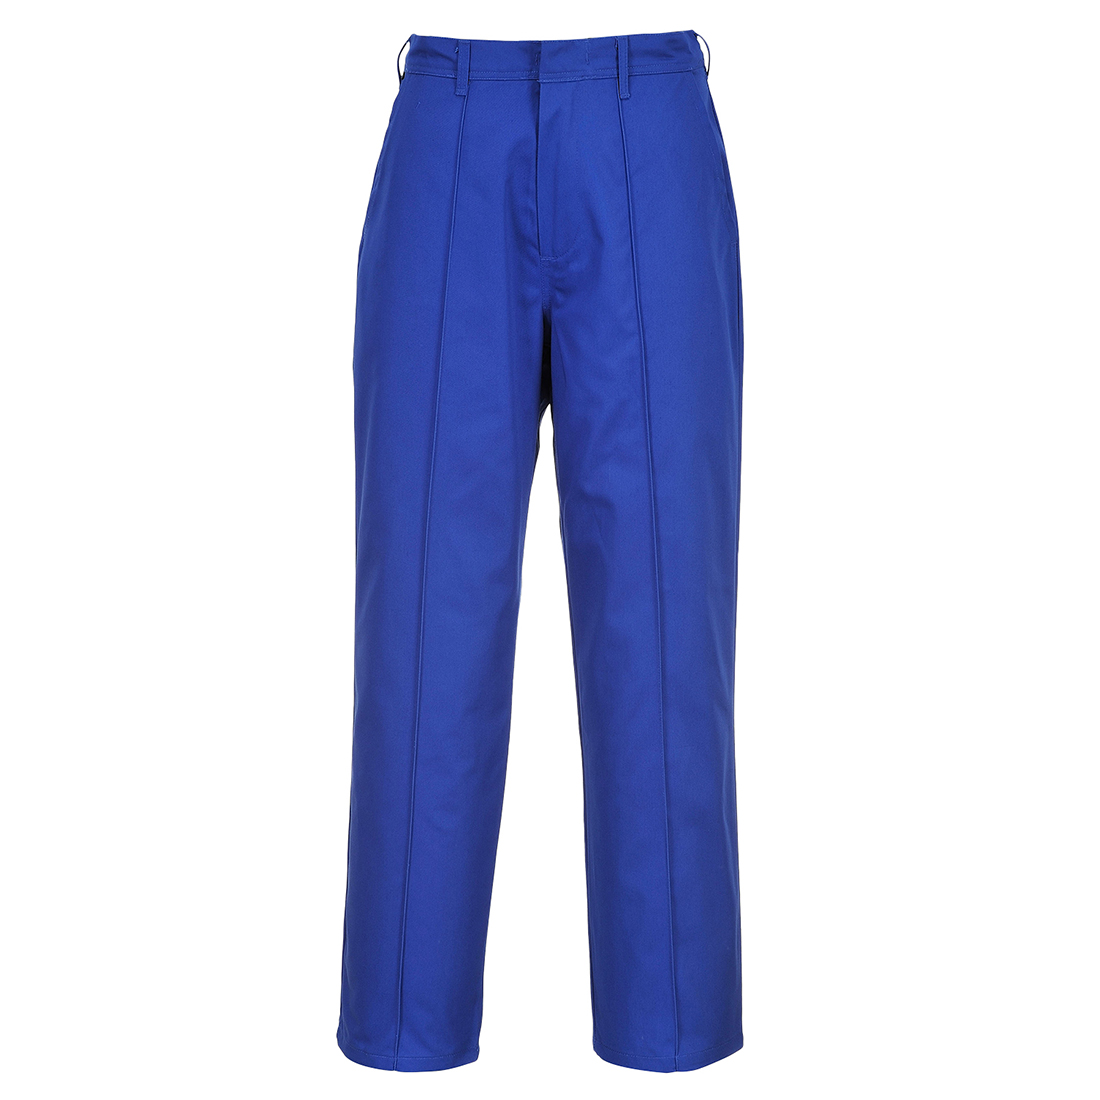 Wakefield Trousers - Royal Blue Tall